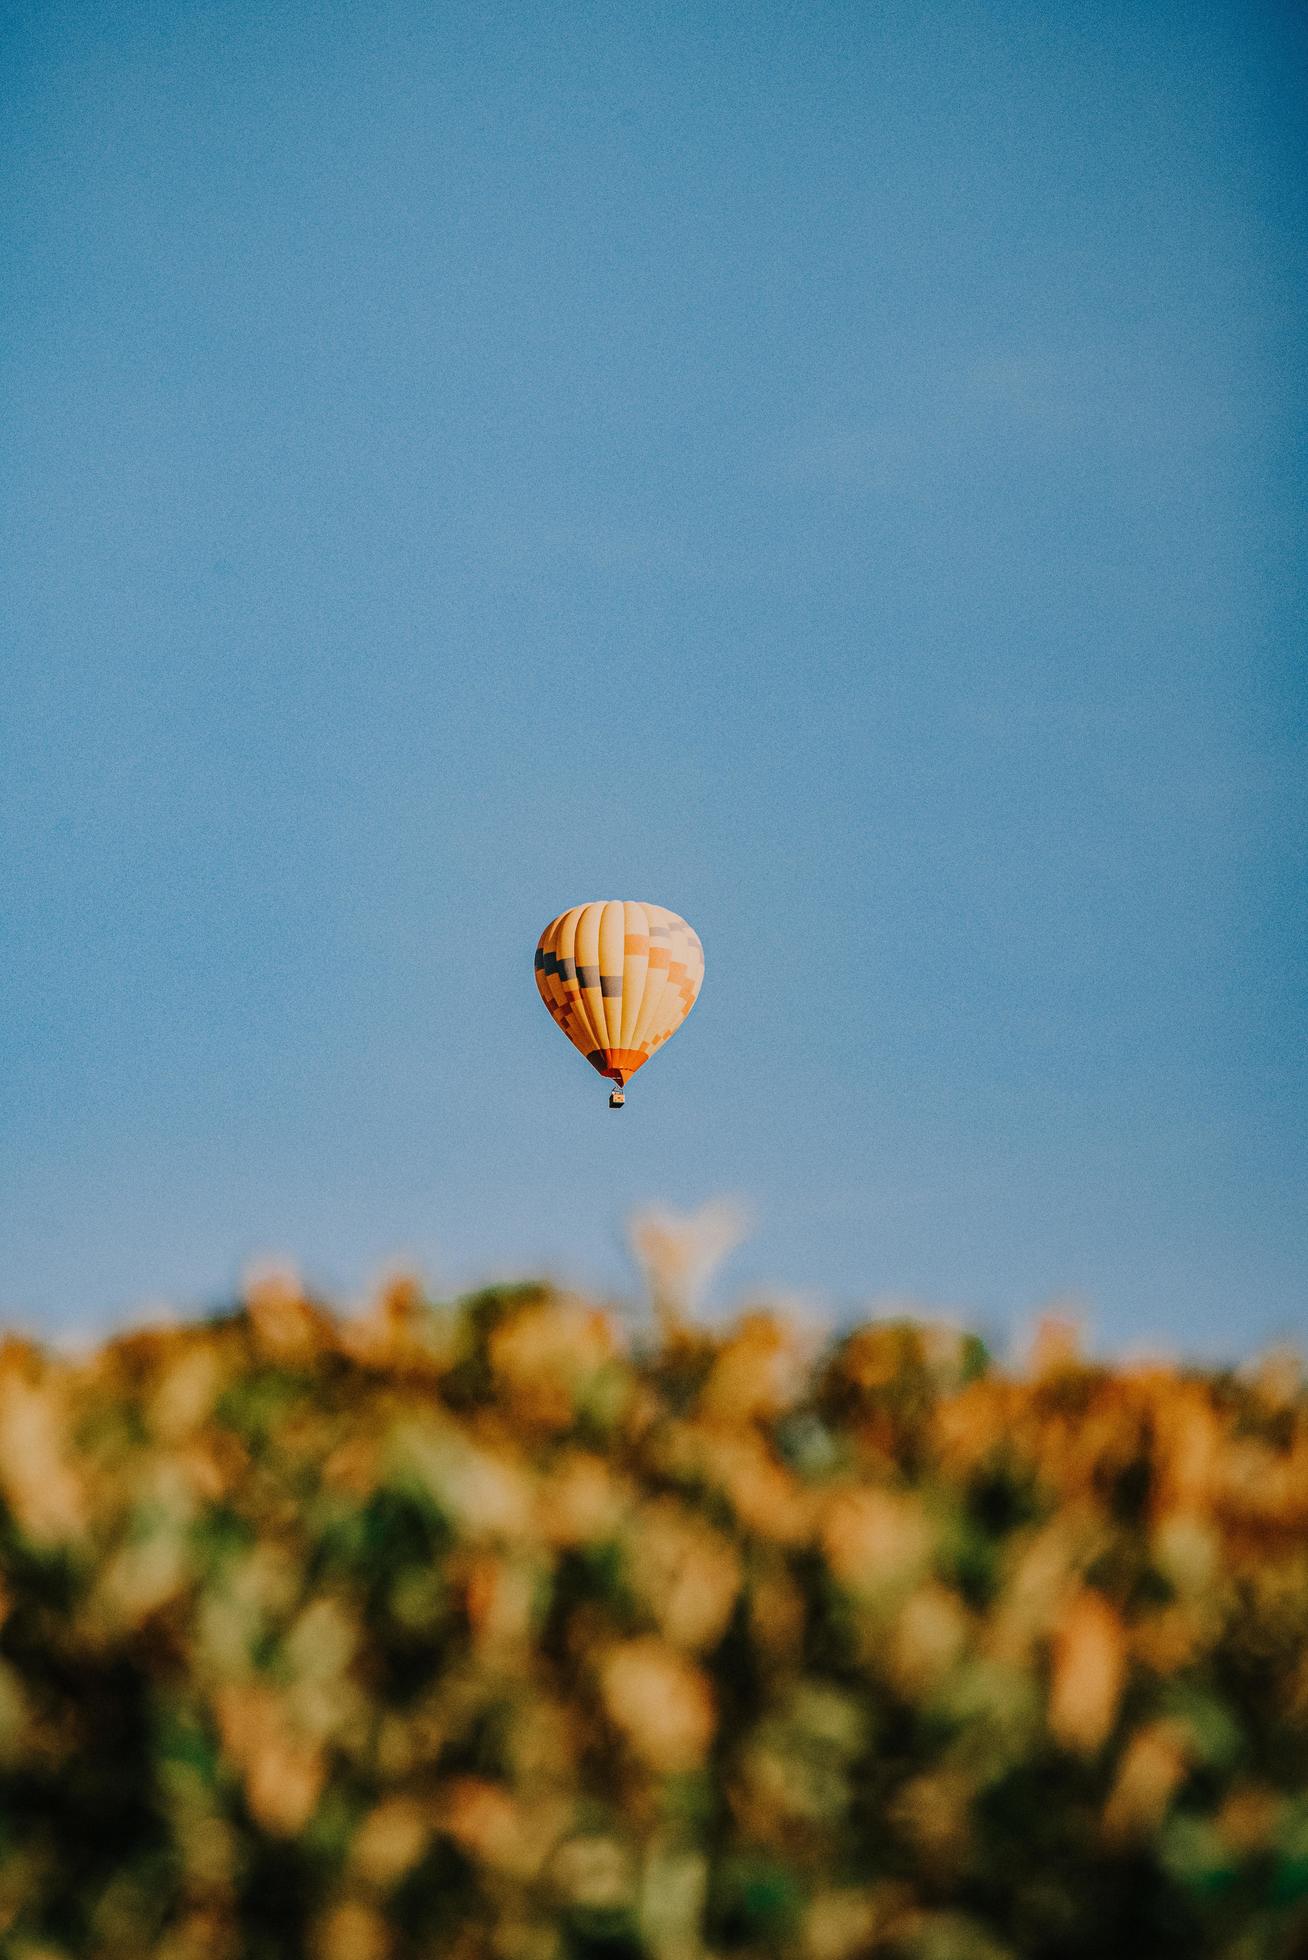 A hot air balloon floating in the sky above a field of flowers - Hot air balloons